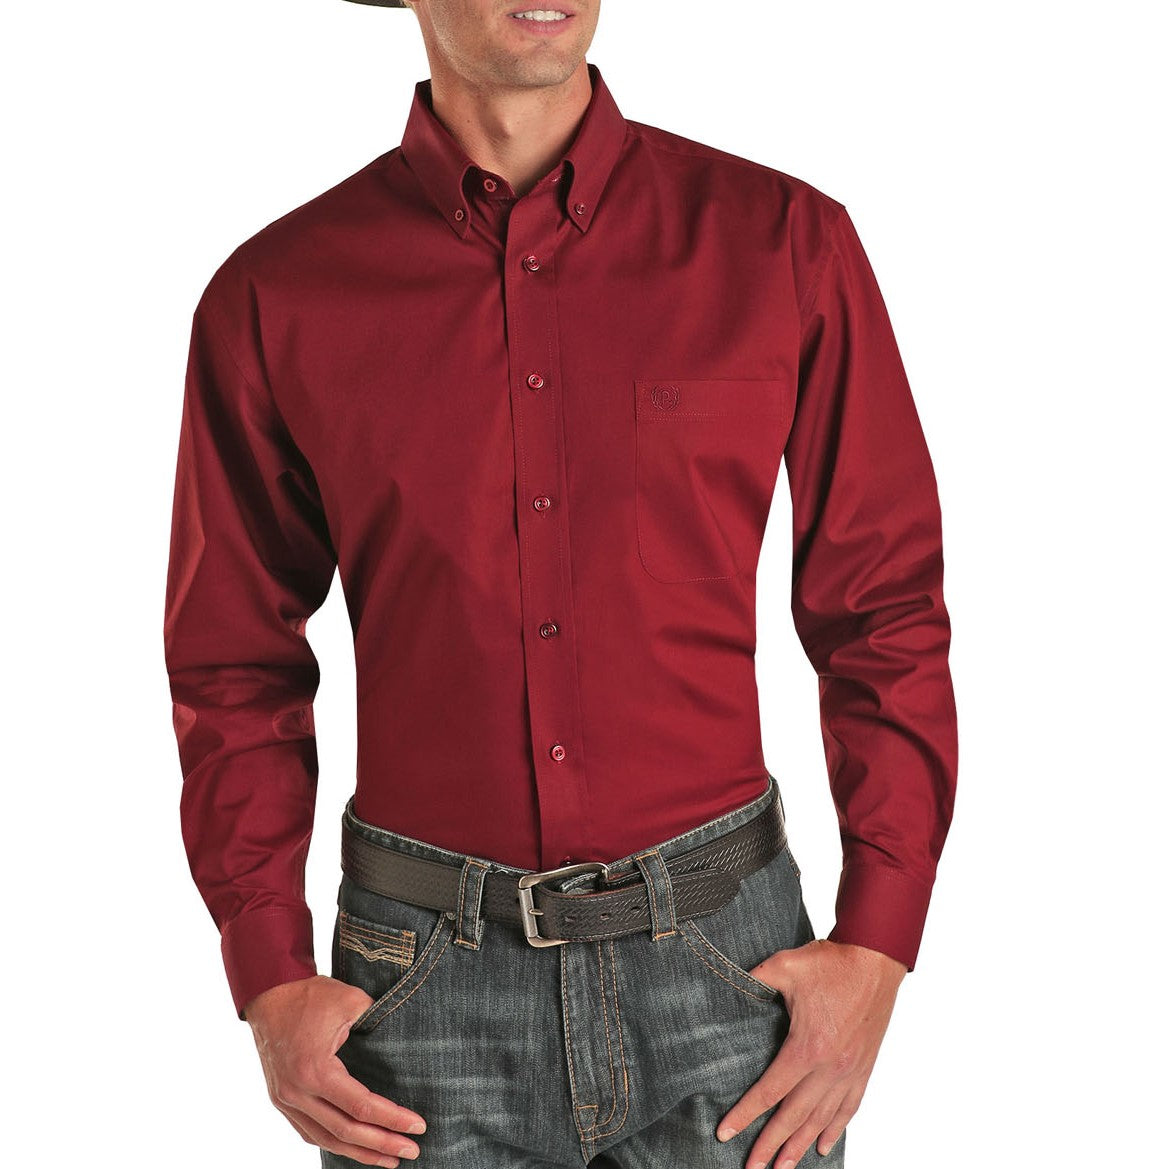 Panhandle Men's Solid Stretch Maroon Button-Down Shirt 36D1601-60